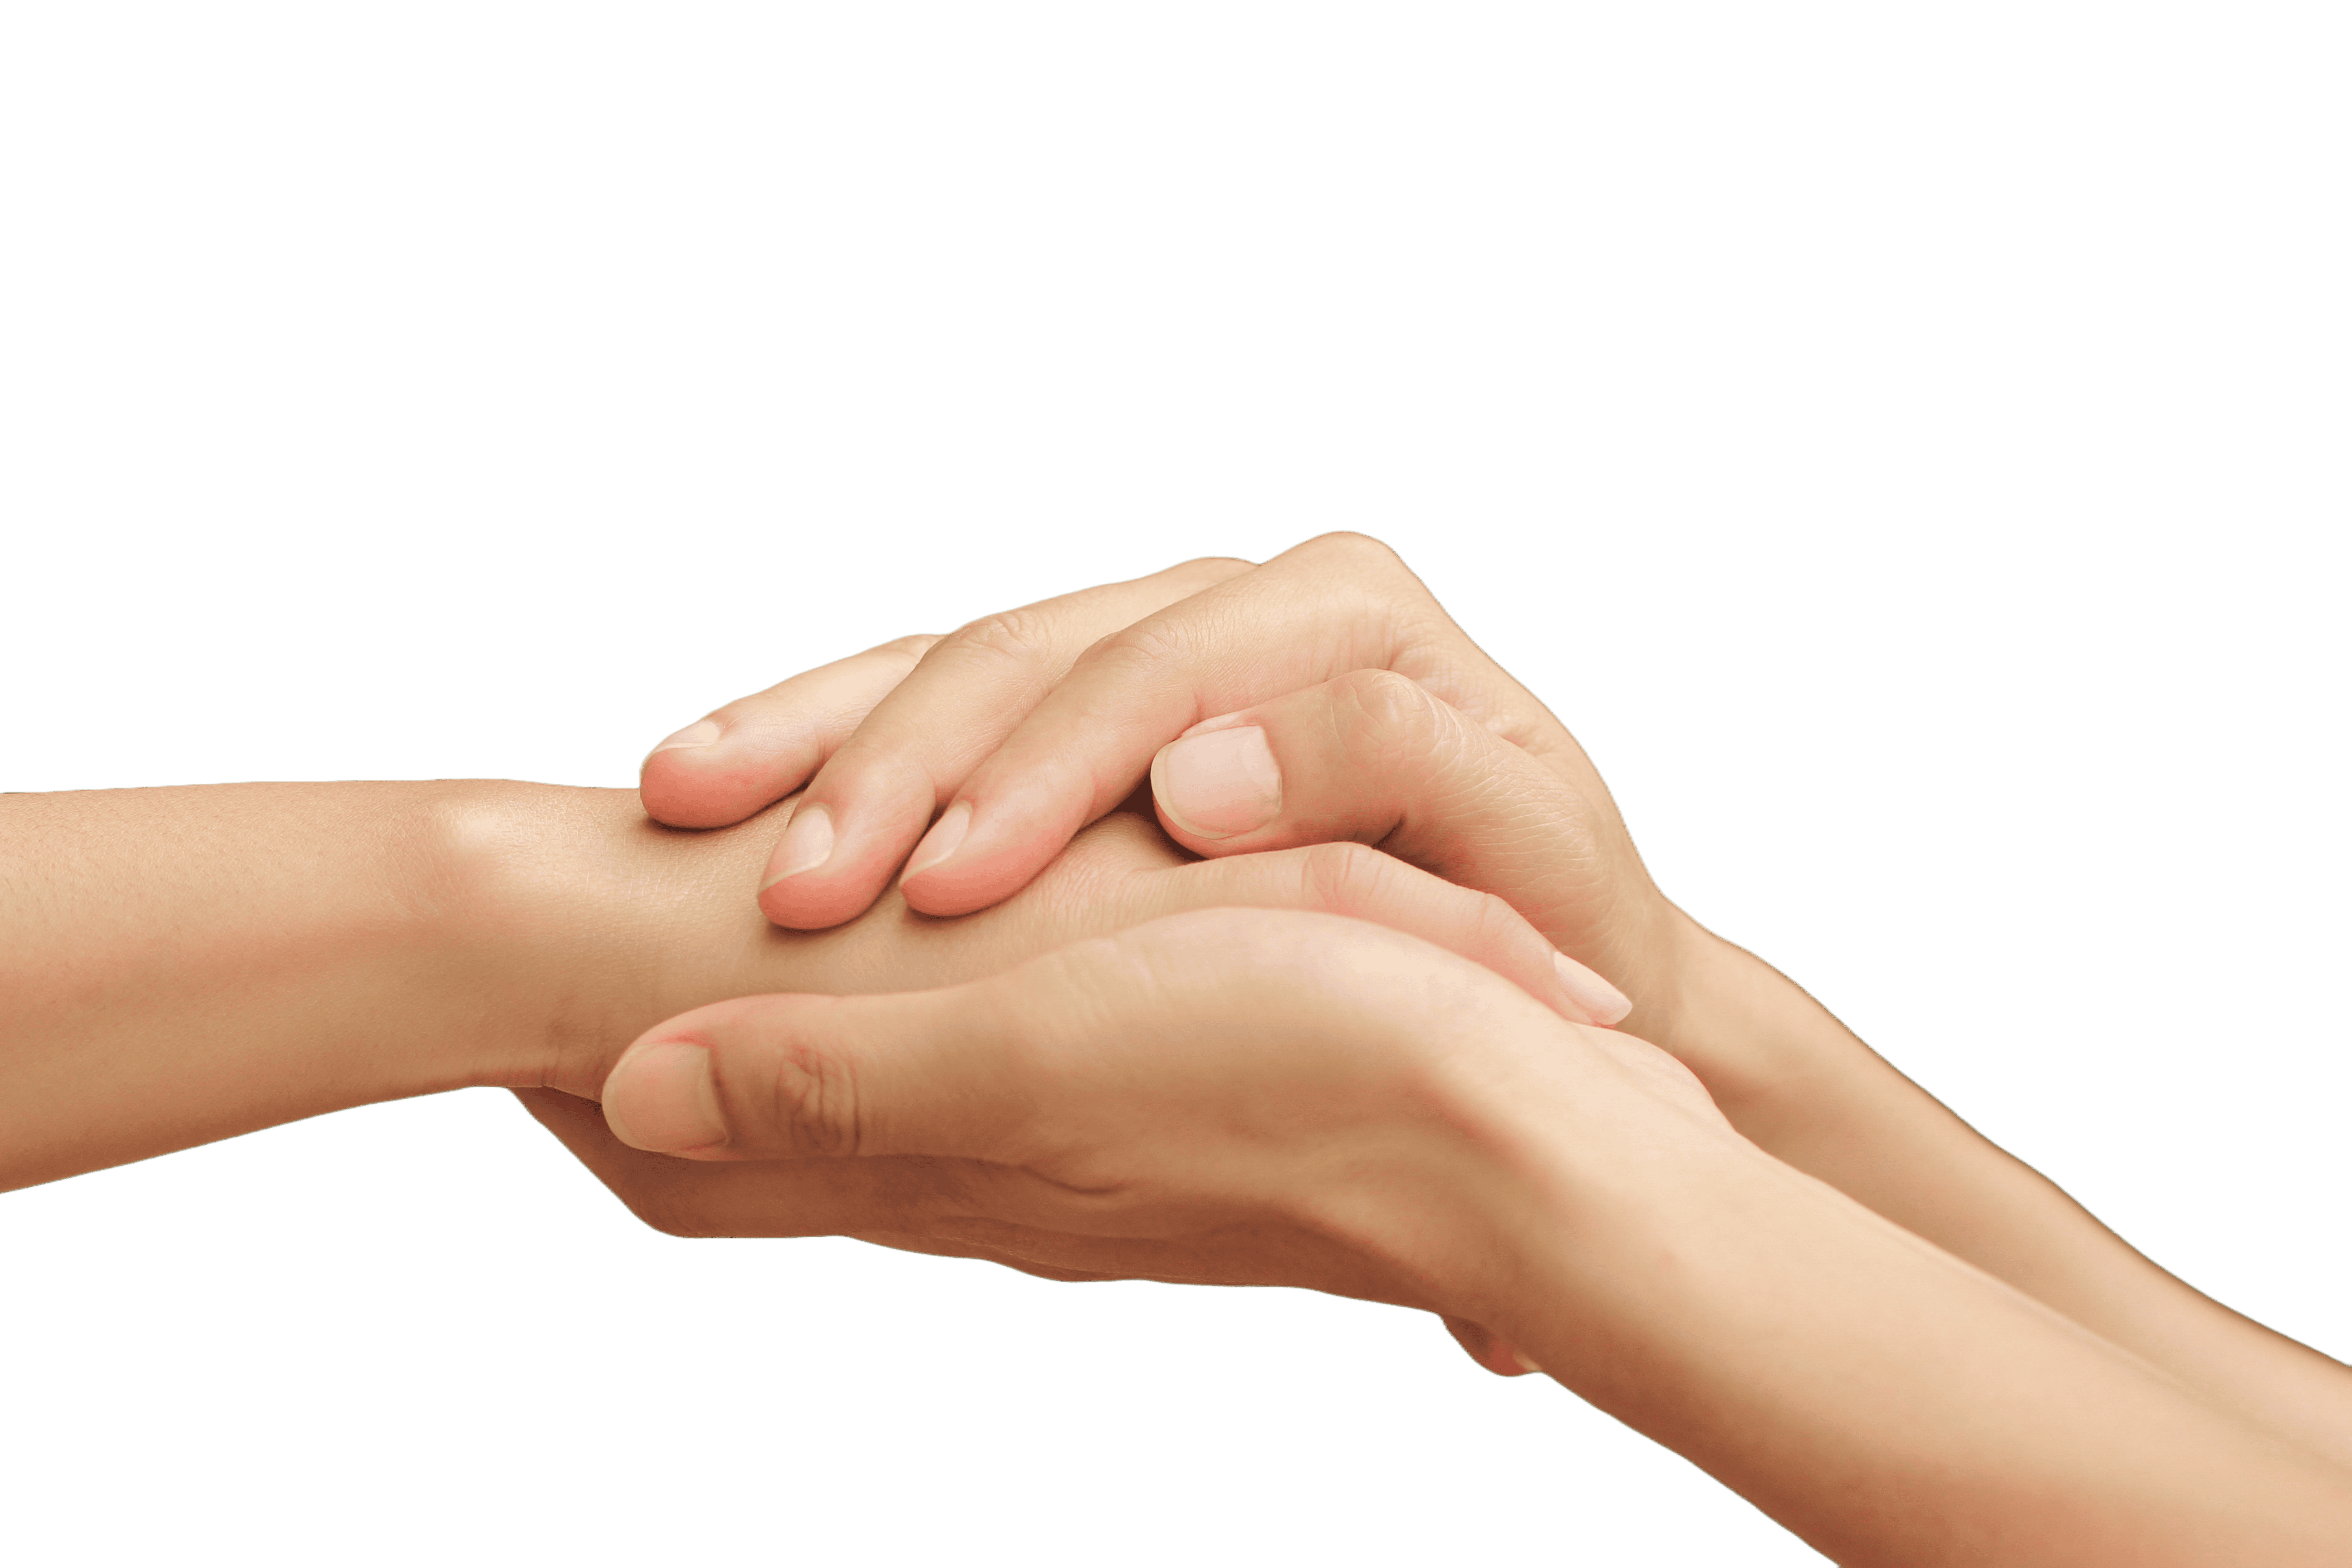 Two hands gently clasp another hand in a comforting manner, epitomizing the essence of primary care.